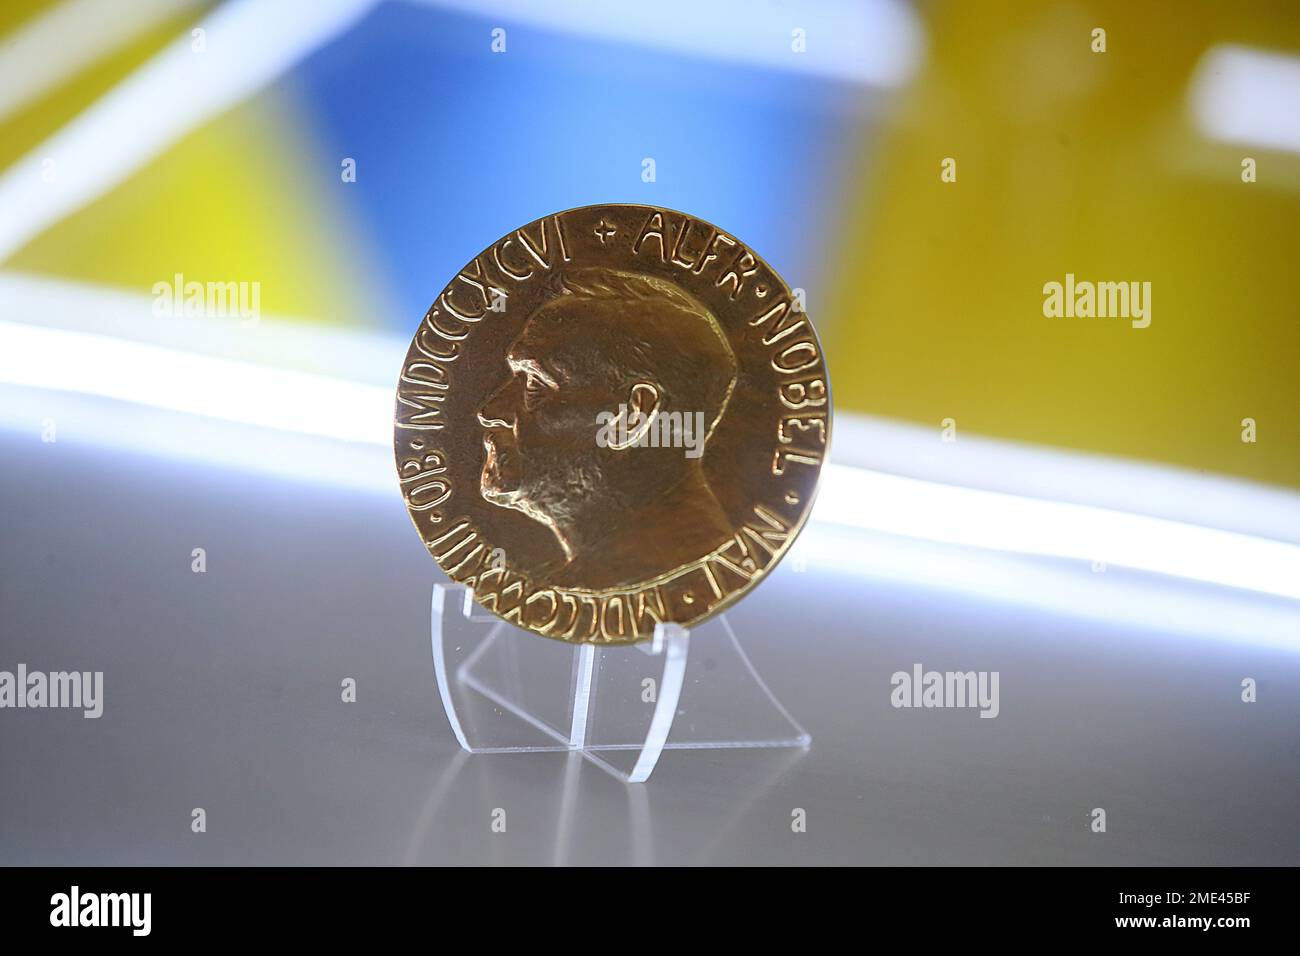 KYIV, UKRAINE - JANUARY 23, 2023 - The Nobel Peace Prize Medal won by the Center for Civil Liberties (CCL) in 2022 is on display during the honorary l Stock Photo